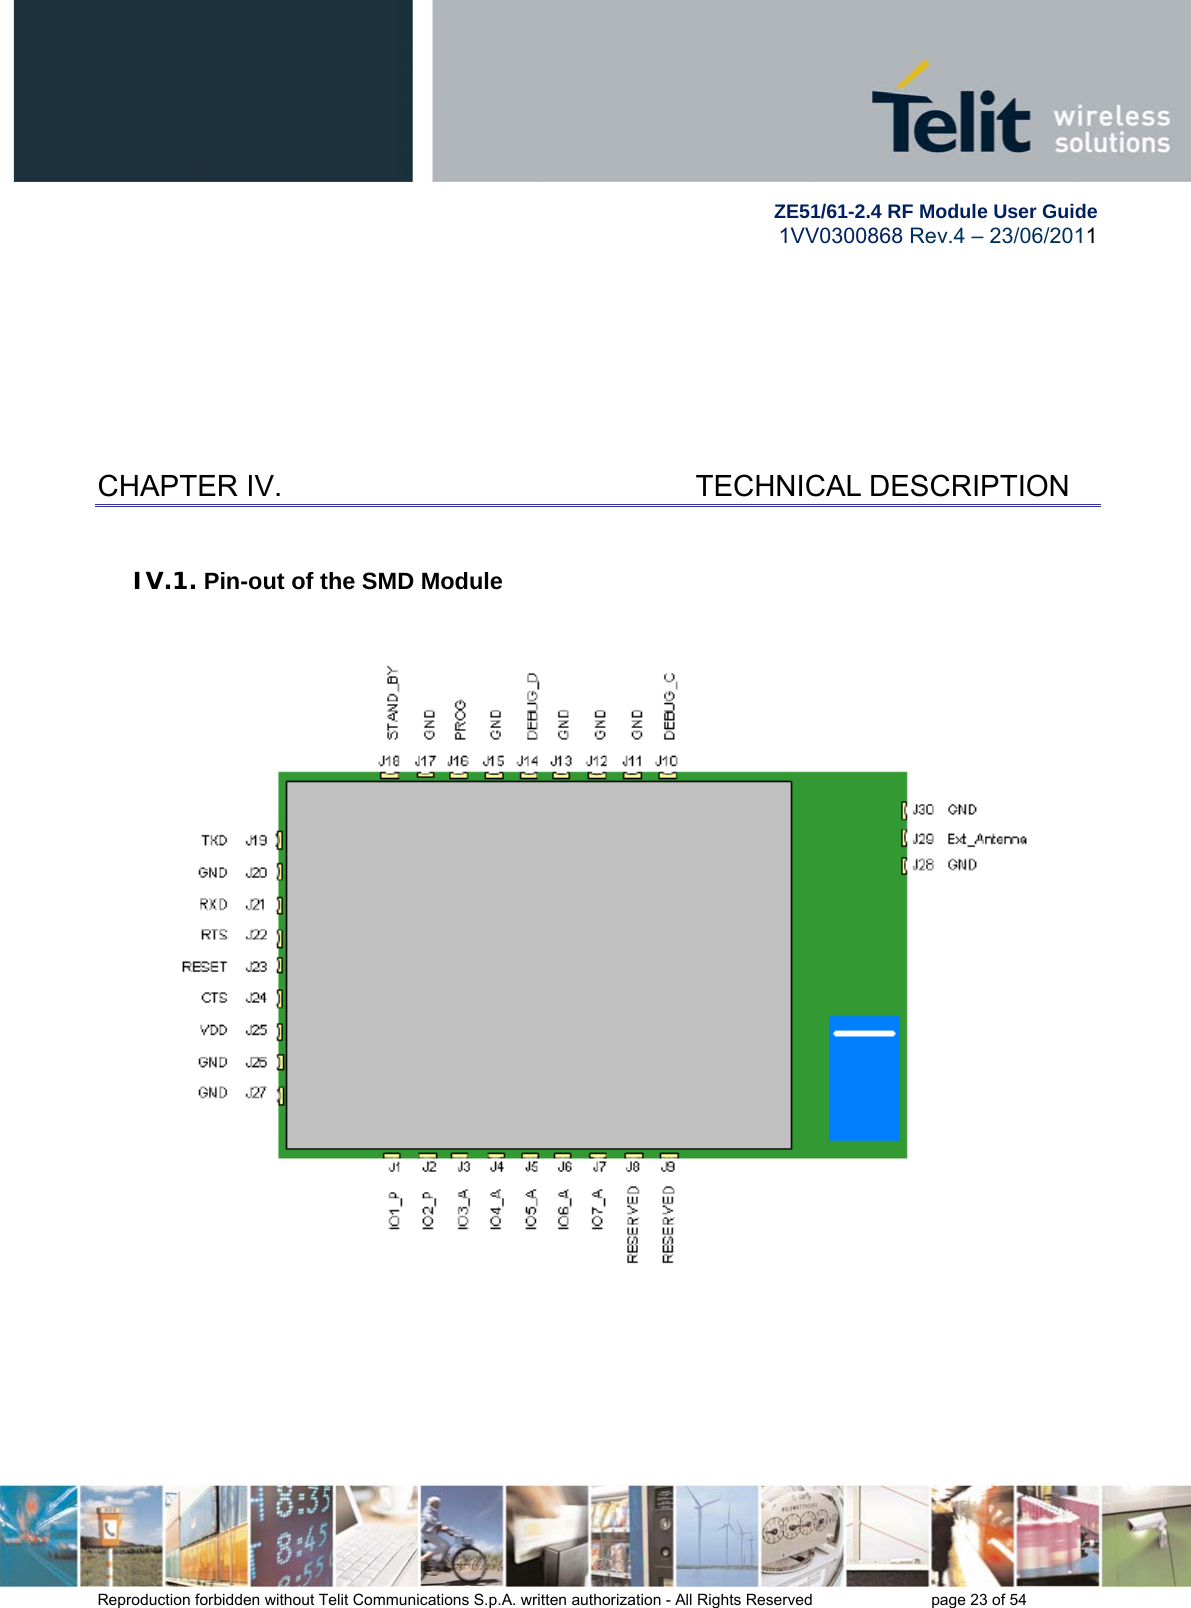        ZE51/61-2.4 RF Module User Guide 1VV0300868 Rev.4 – 23/06/2011 Reproduction forbidden without Telit Communications S.p.A. written authorization - All Rights Reserved    page 23 of 54  CHAPTER IV.   TECHNICAL DESCRIPTION IV.1. Pin-out of the SMD Module     